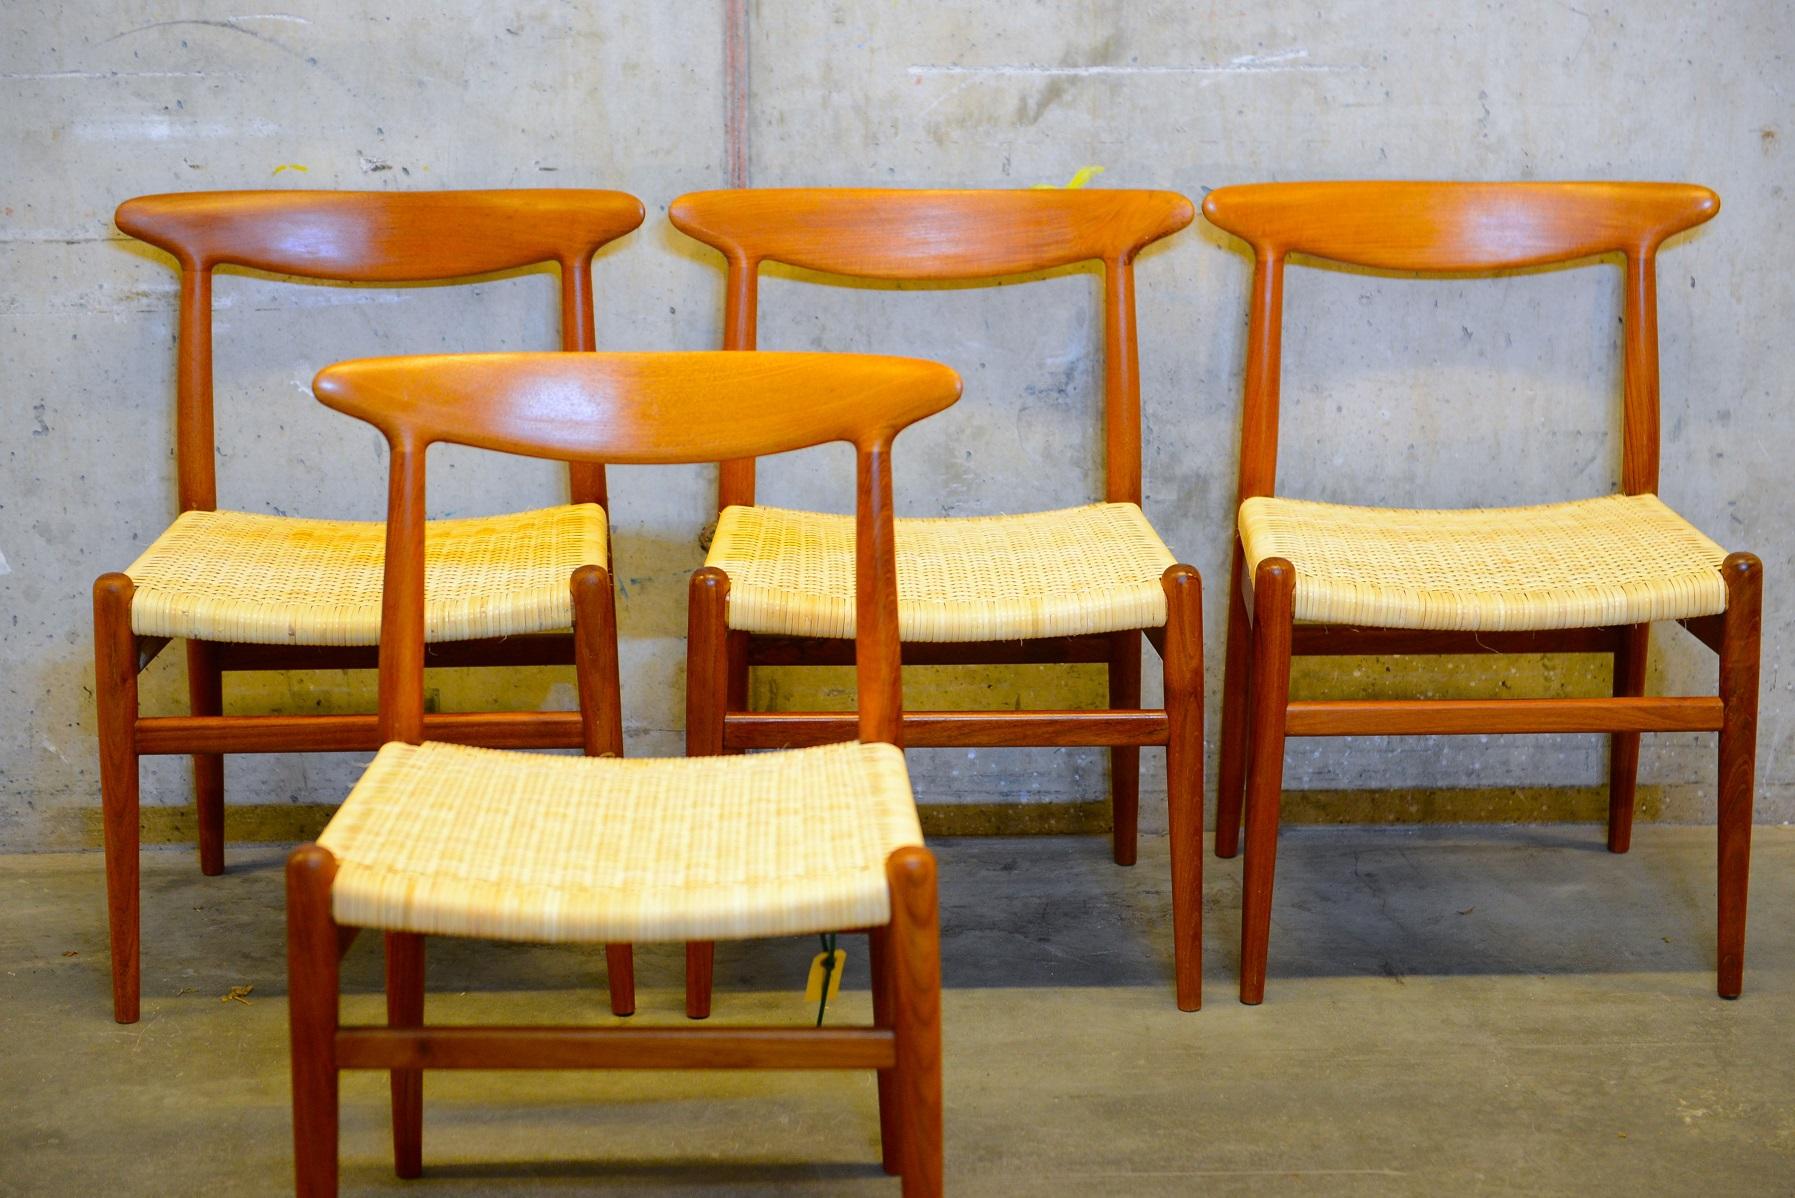 Set of 4 dining chairs in teak wood with new cane / rattan seats. Designed by Danish designer Hans J. Wegner. Produced by furniture maker C.M. Madsens Fabrik in Denmark. Midcentury Scandinavian design by one of the great Danish designers of the